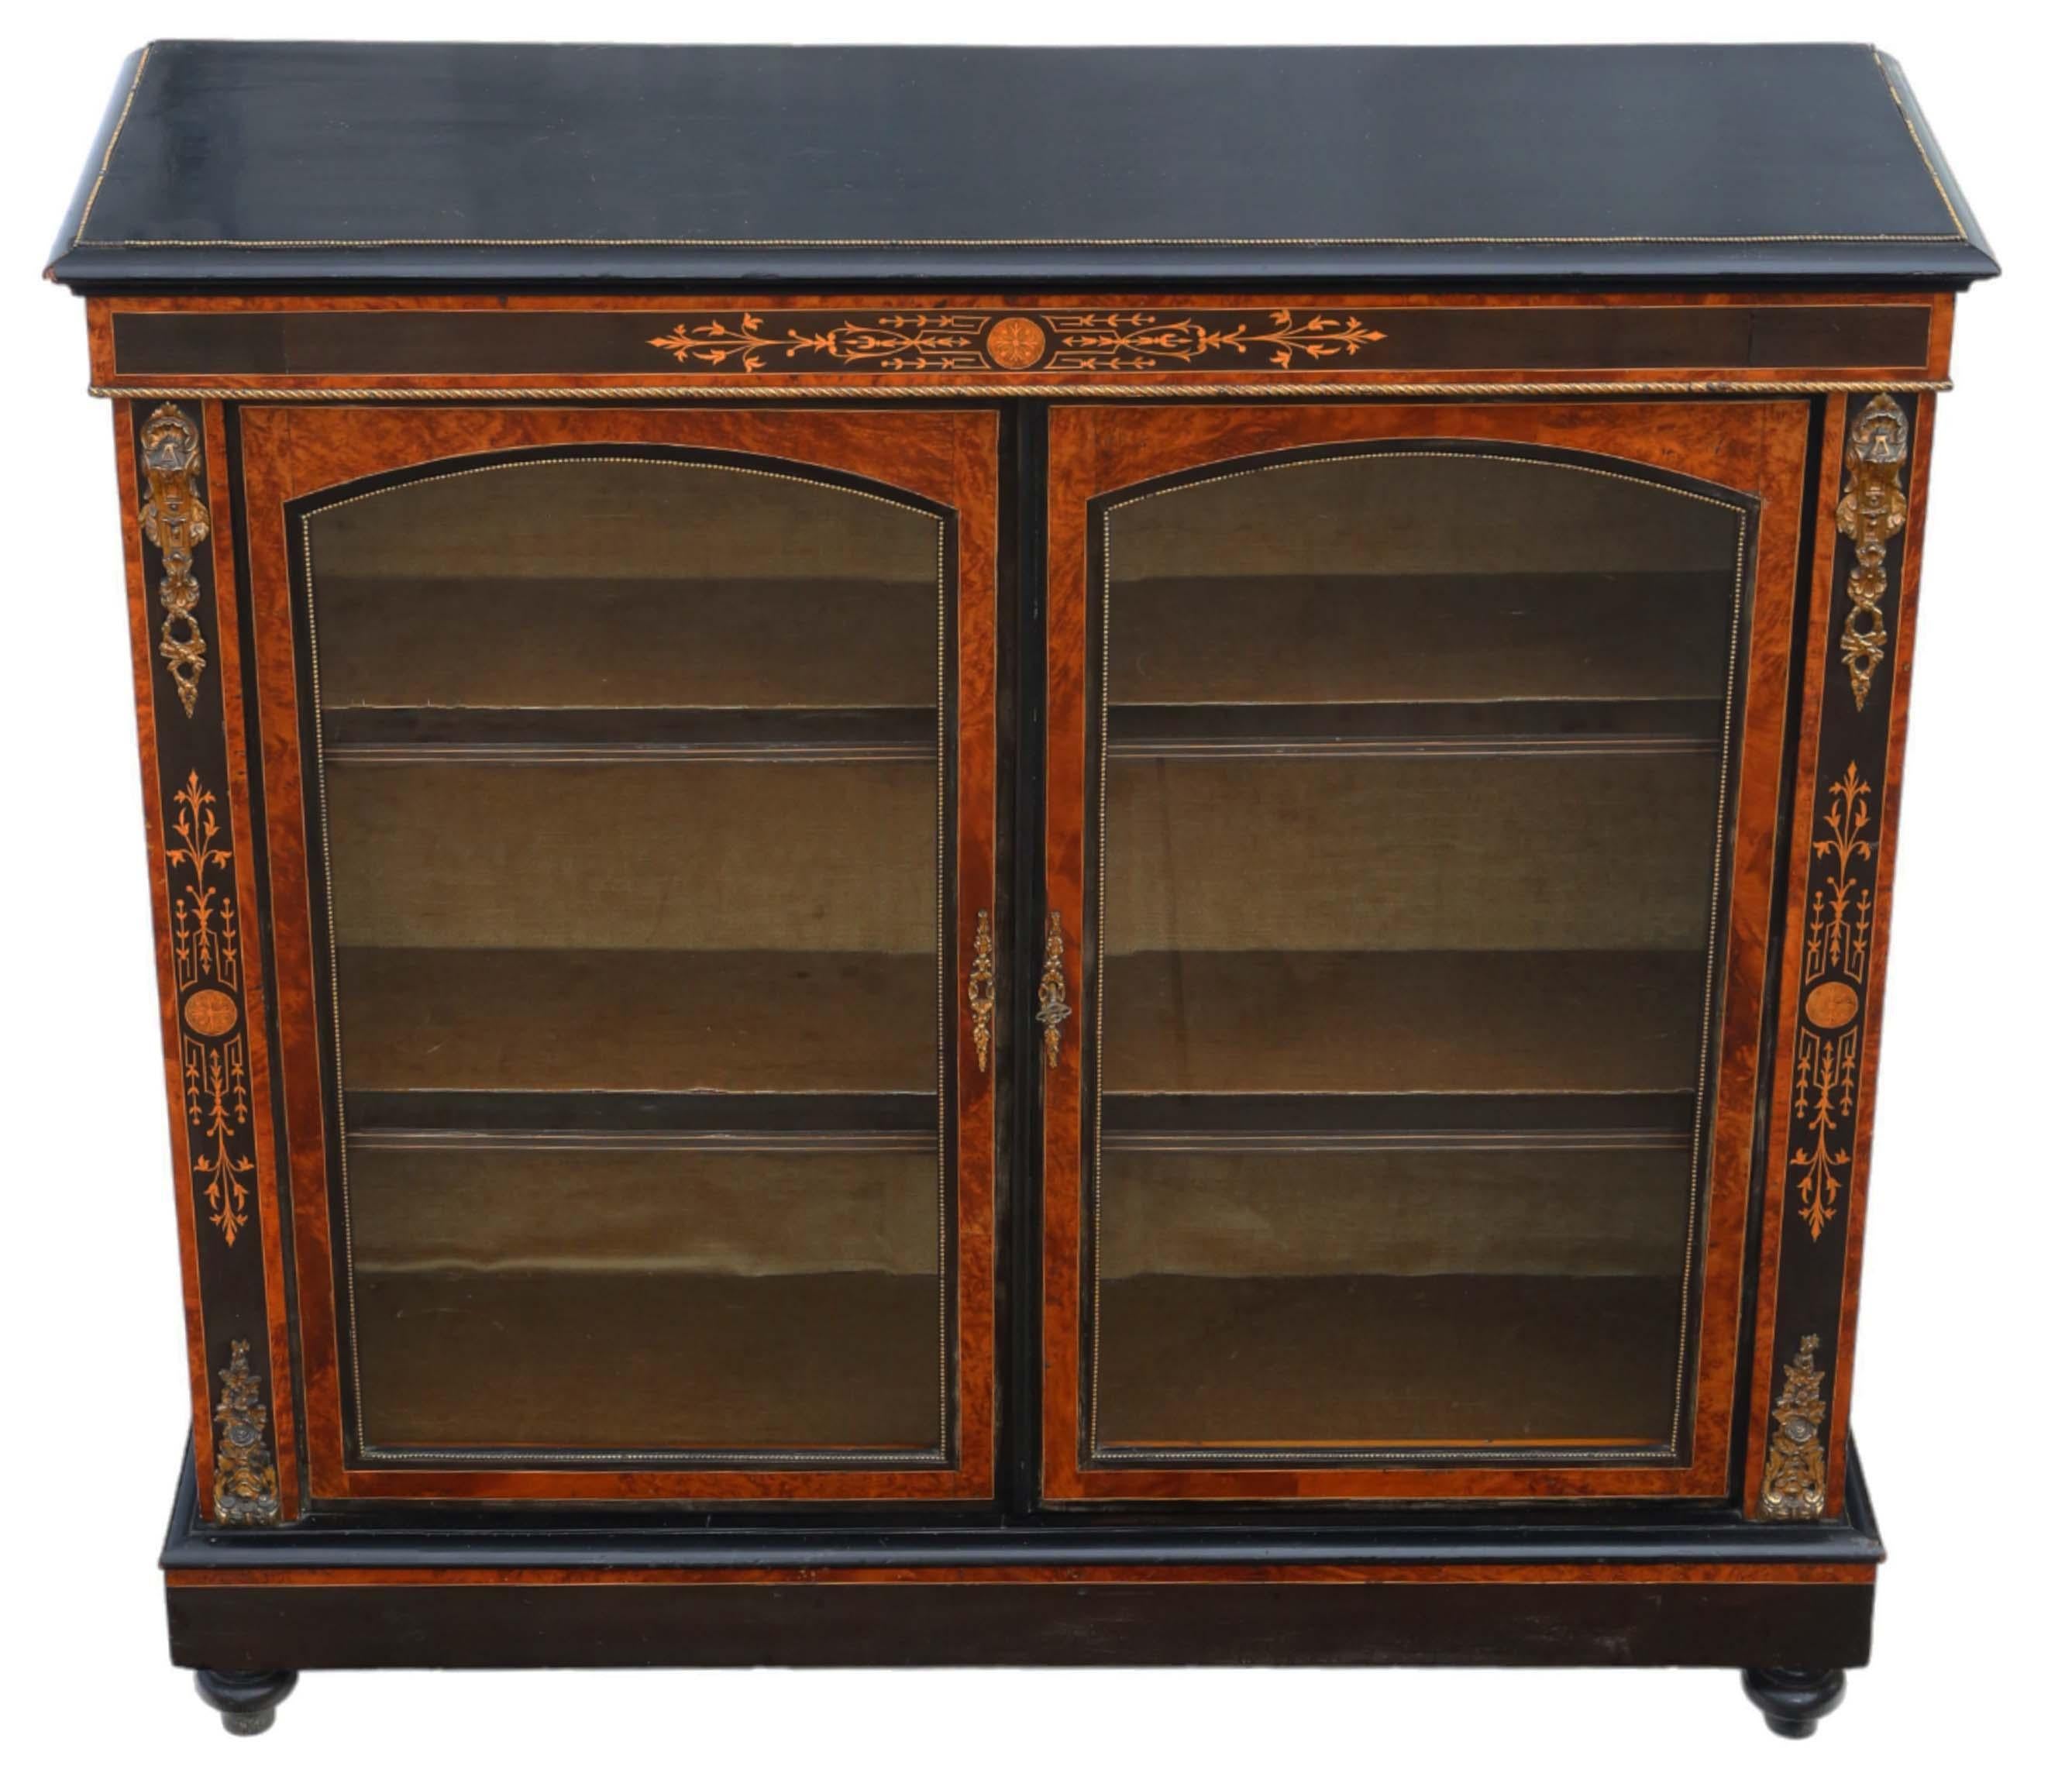 Antique, circa 1880, large quality inlaid ebonised, amboyna and burr walnut pier display cabinet in Aesthetic style. It showcases the best color and patina.

Solid and sturdy, with no loose joints and a key included. The cabinet features lovely